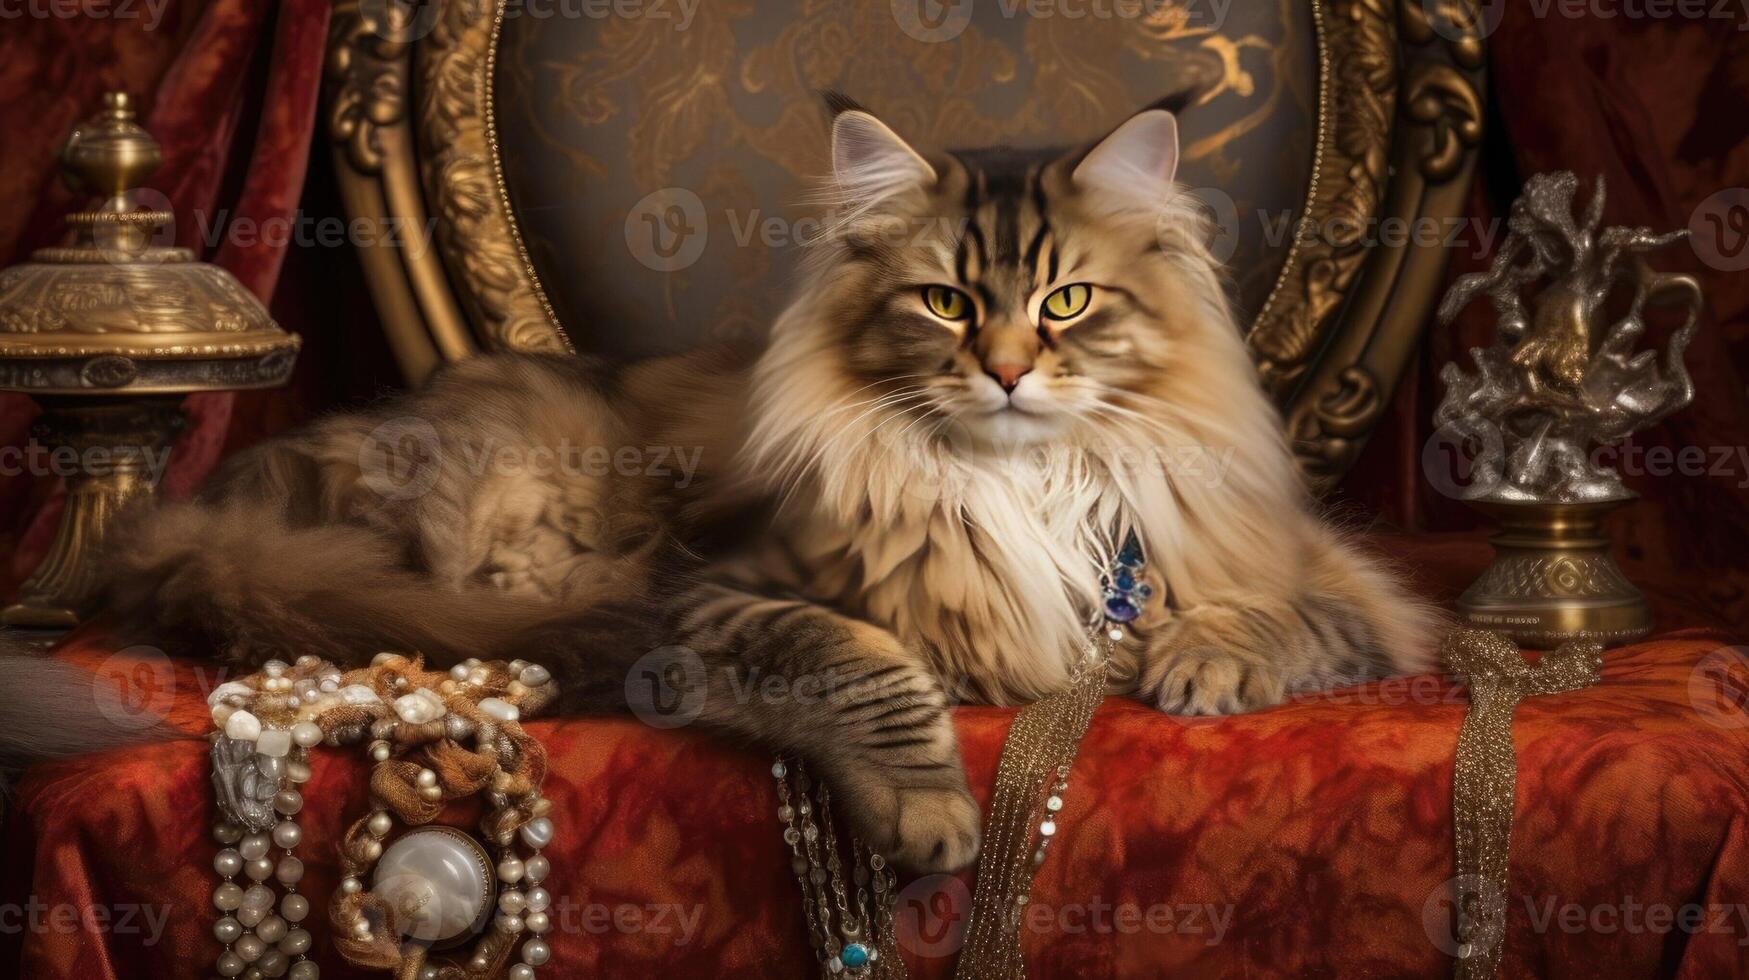 Cats elegantly modeling jewelry and accessories for a luxury brand embodying grace and sophistication photo